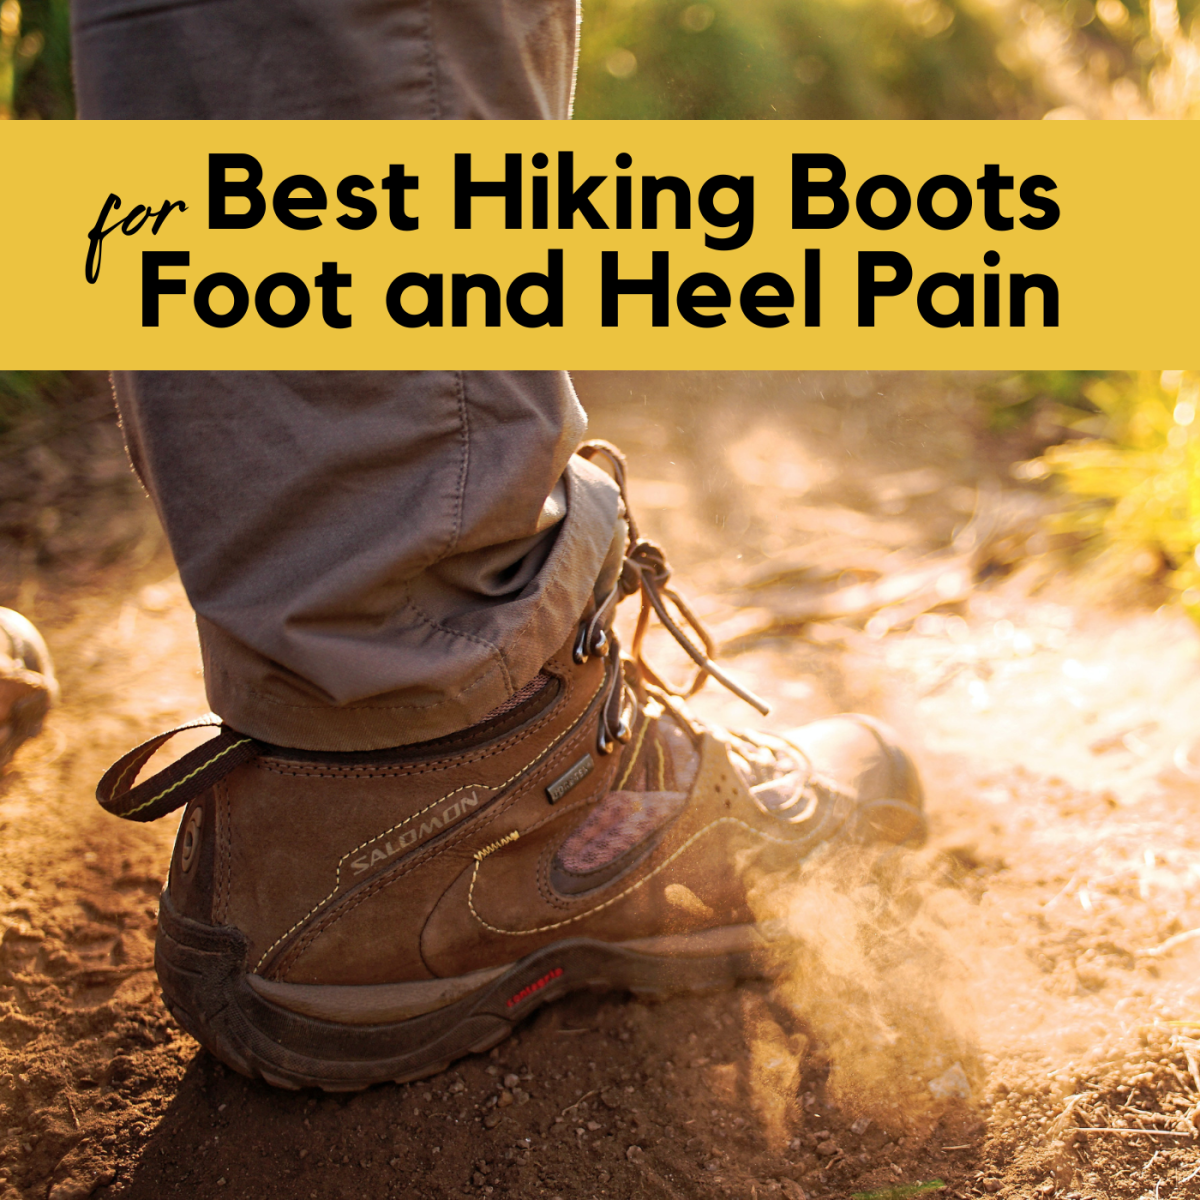 Prevent foot and heel pain with a good pair of hiking boots. Hiking should feel good!